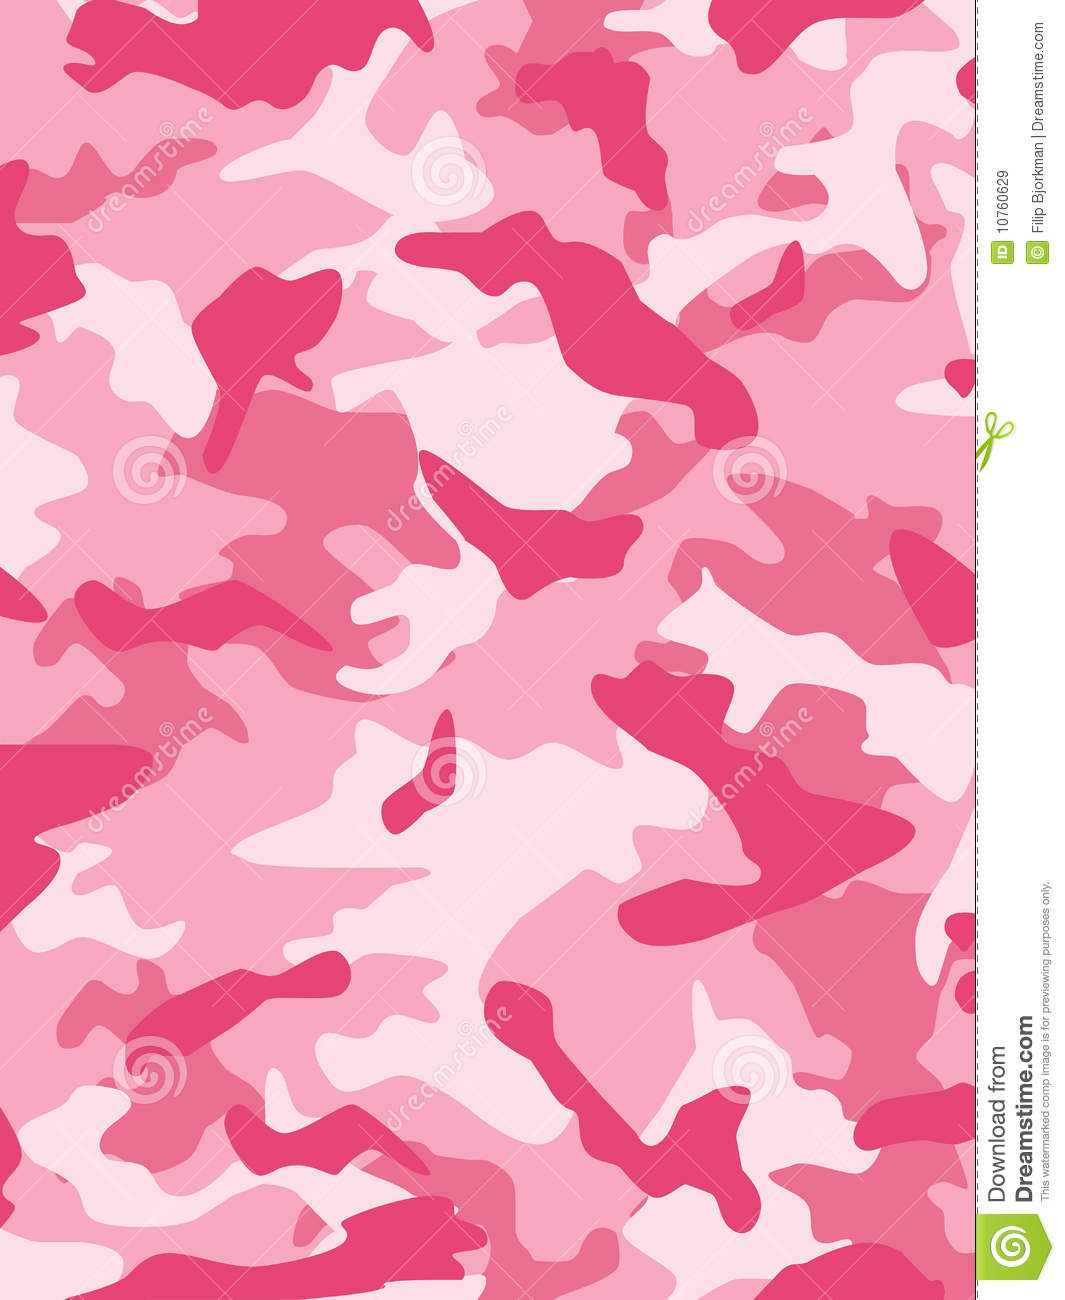 Pink Camouflage Wallpaper